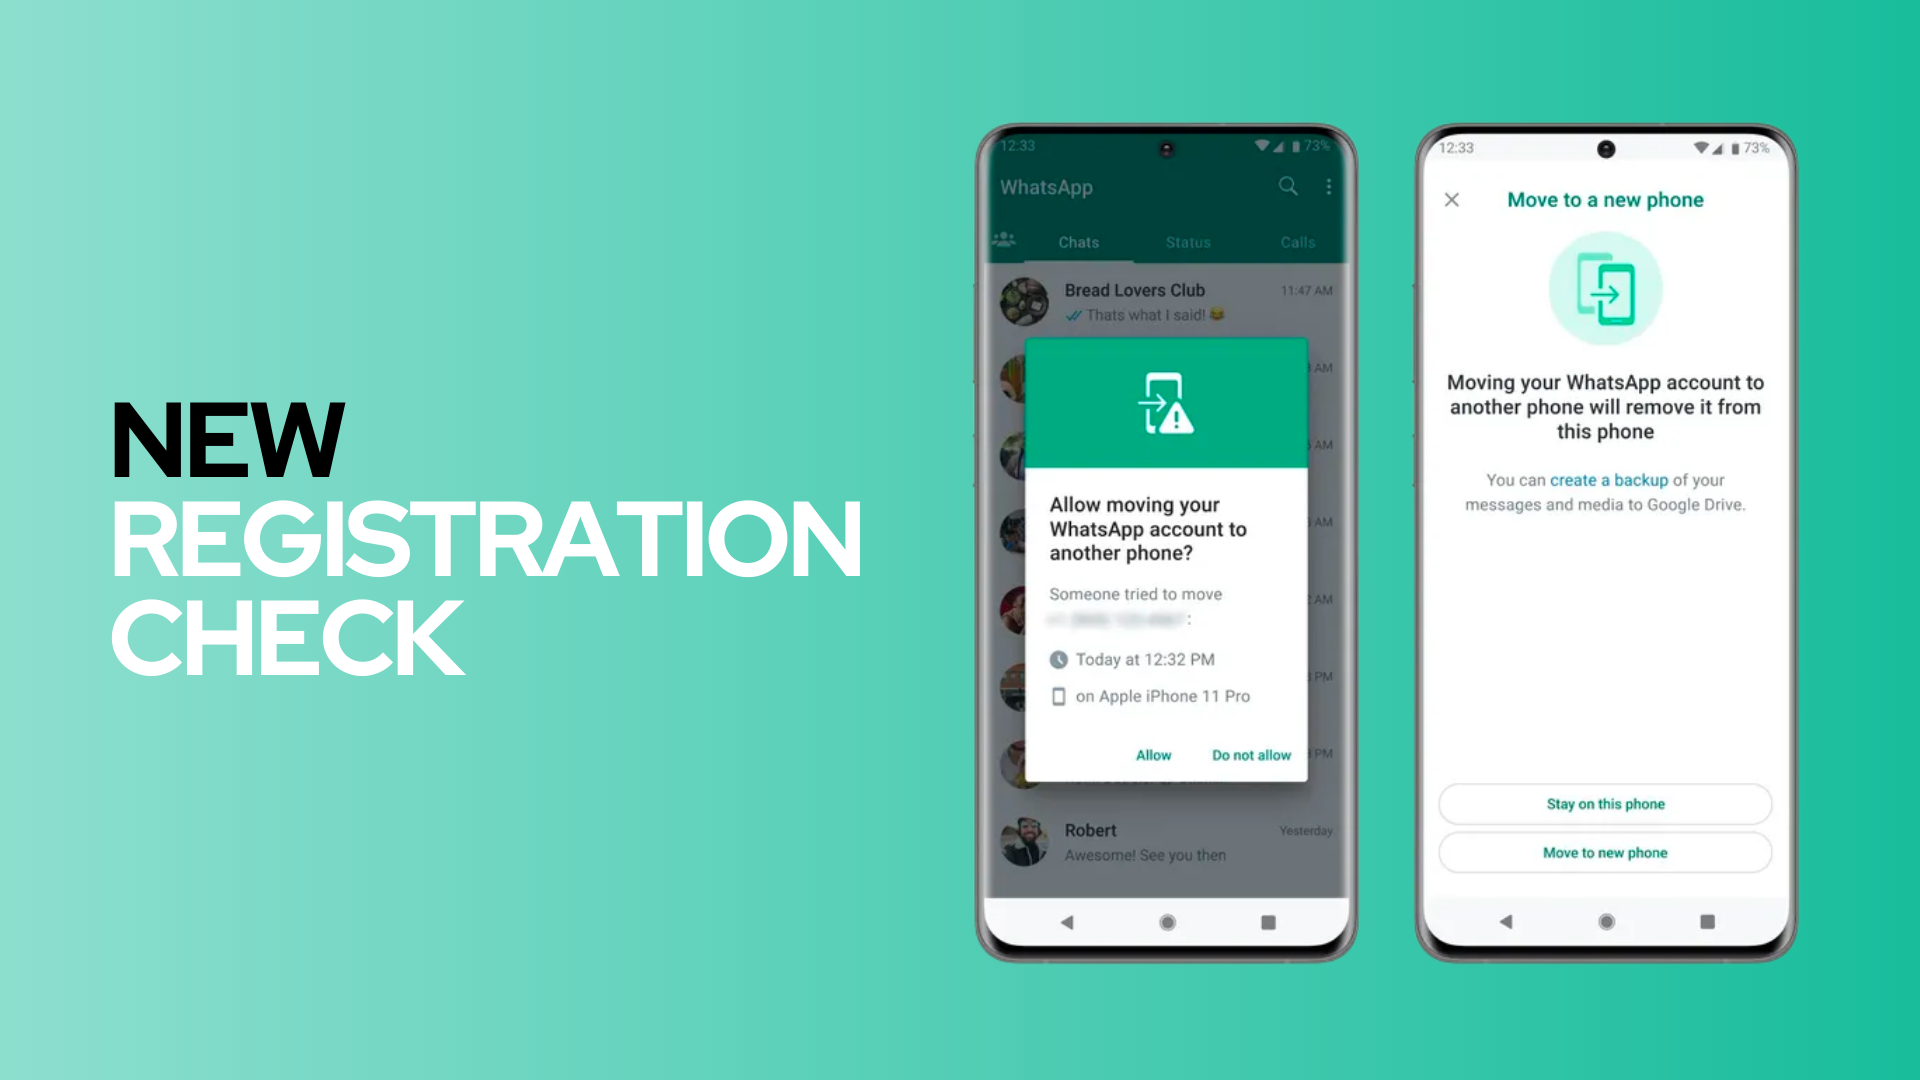 Everything you should know about WhatsApp’s new security checks